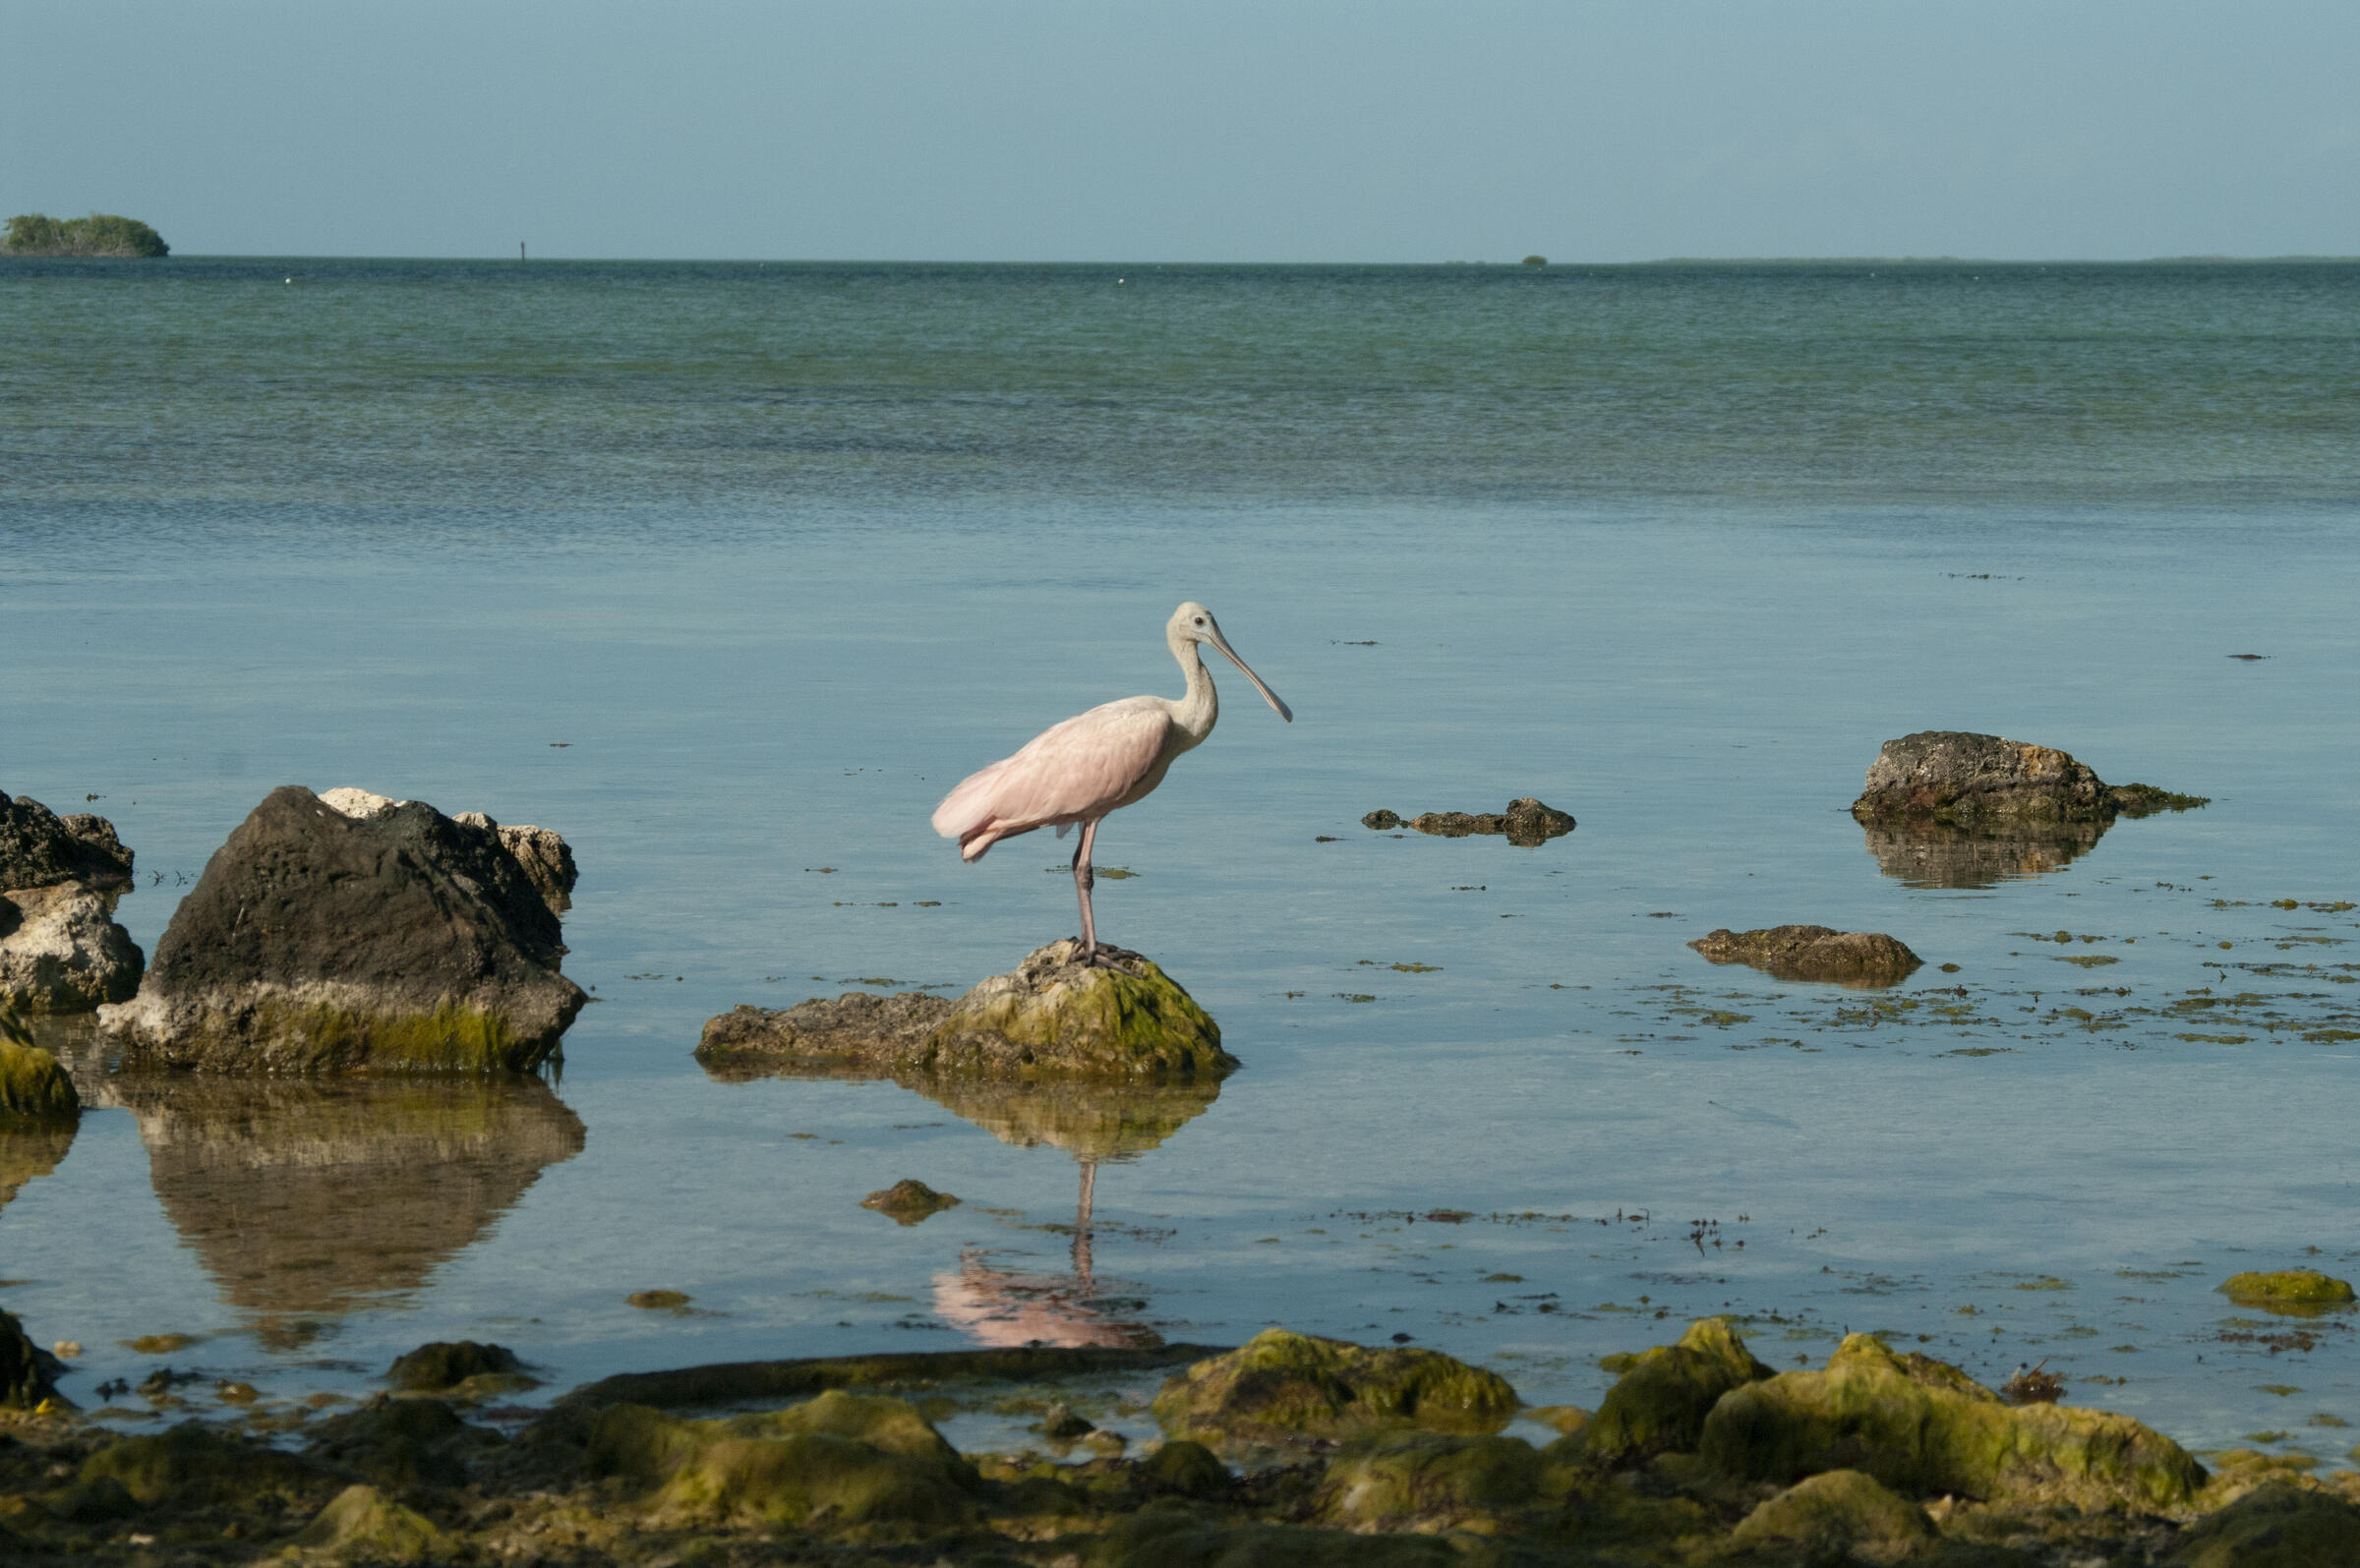 Roseate Spoonbill at the water's edge